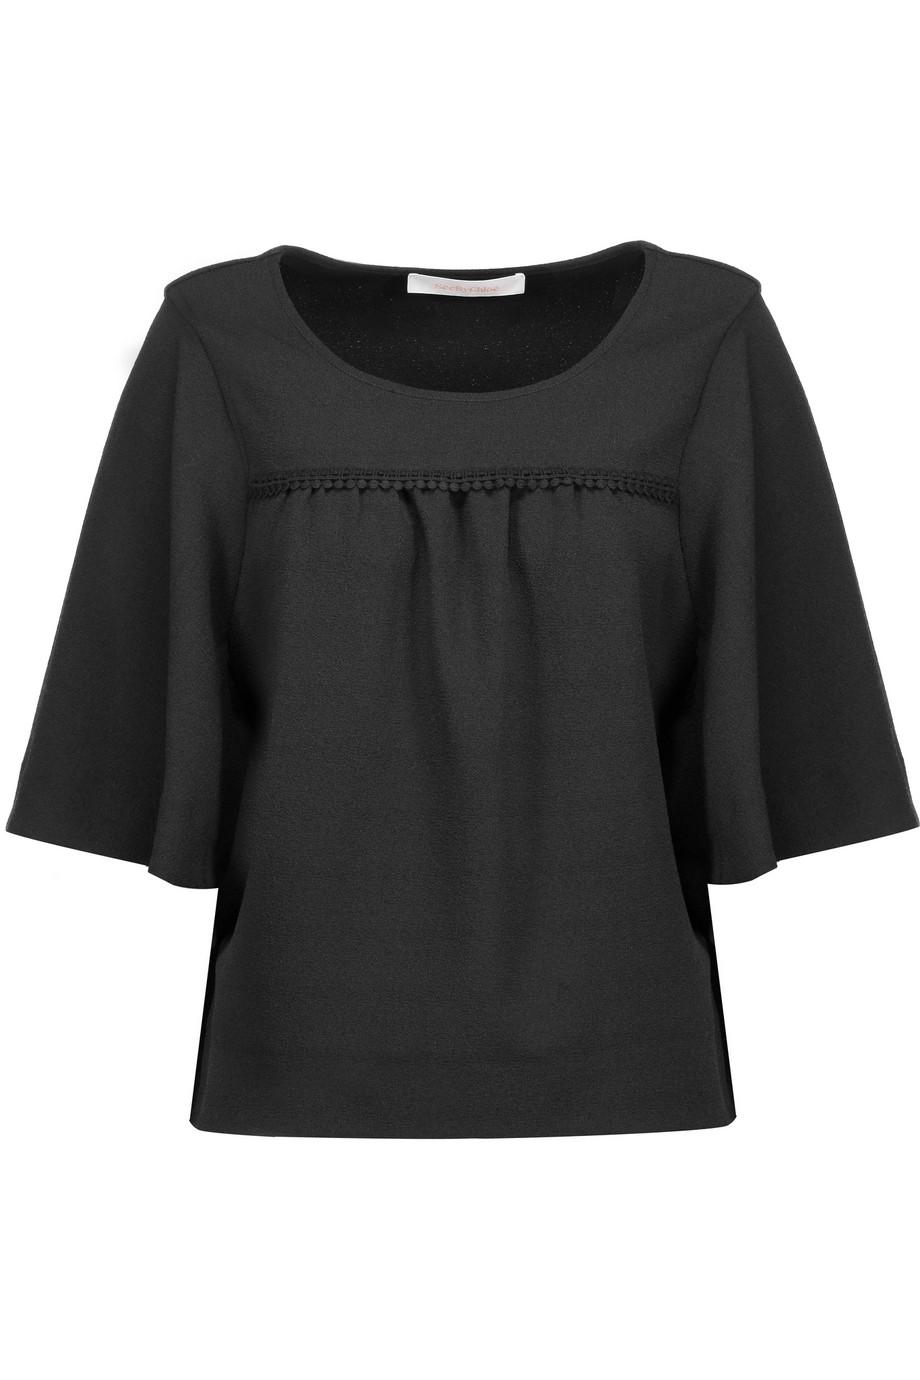 See By Chloé Crepe Top | ModeSens